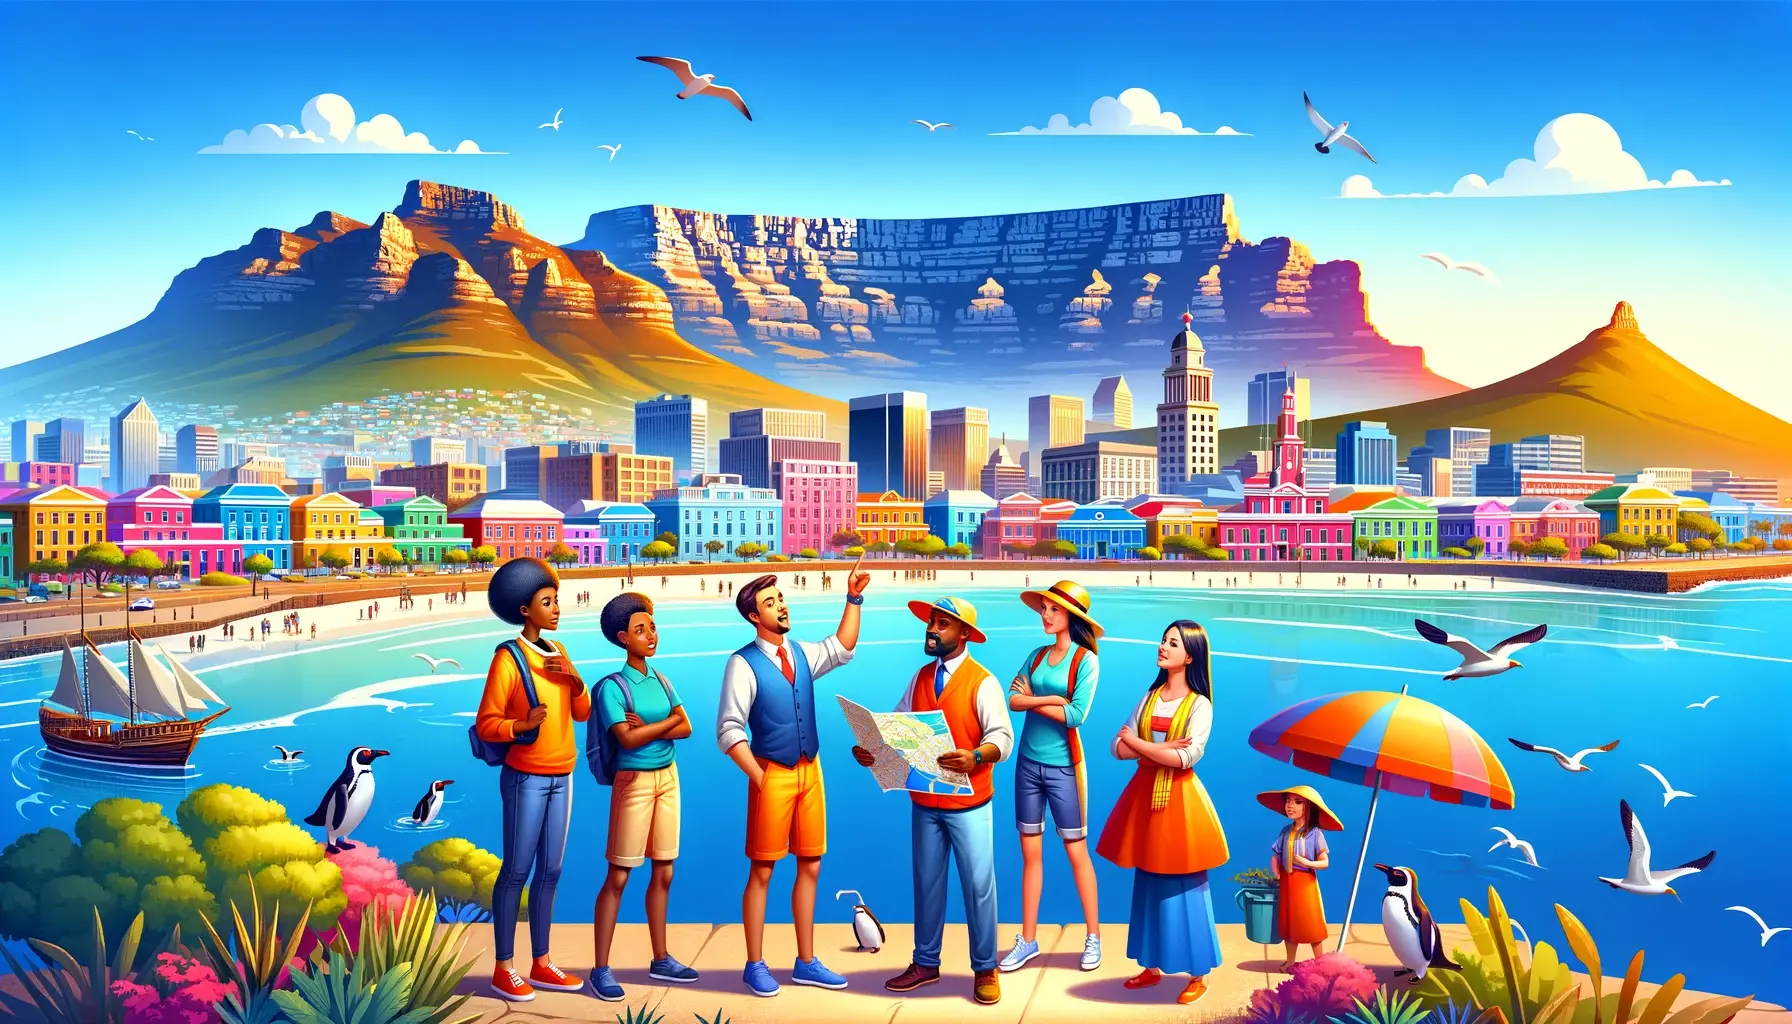 A vibrant and colorful blog featured image representing a tour guide to Cape Town. The image showcases a panoramic view of Cape Town, with the iconic